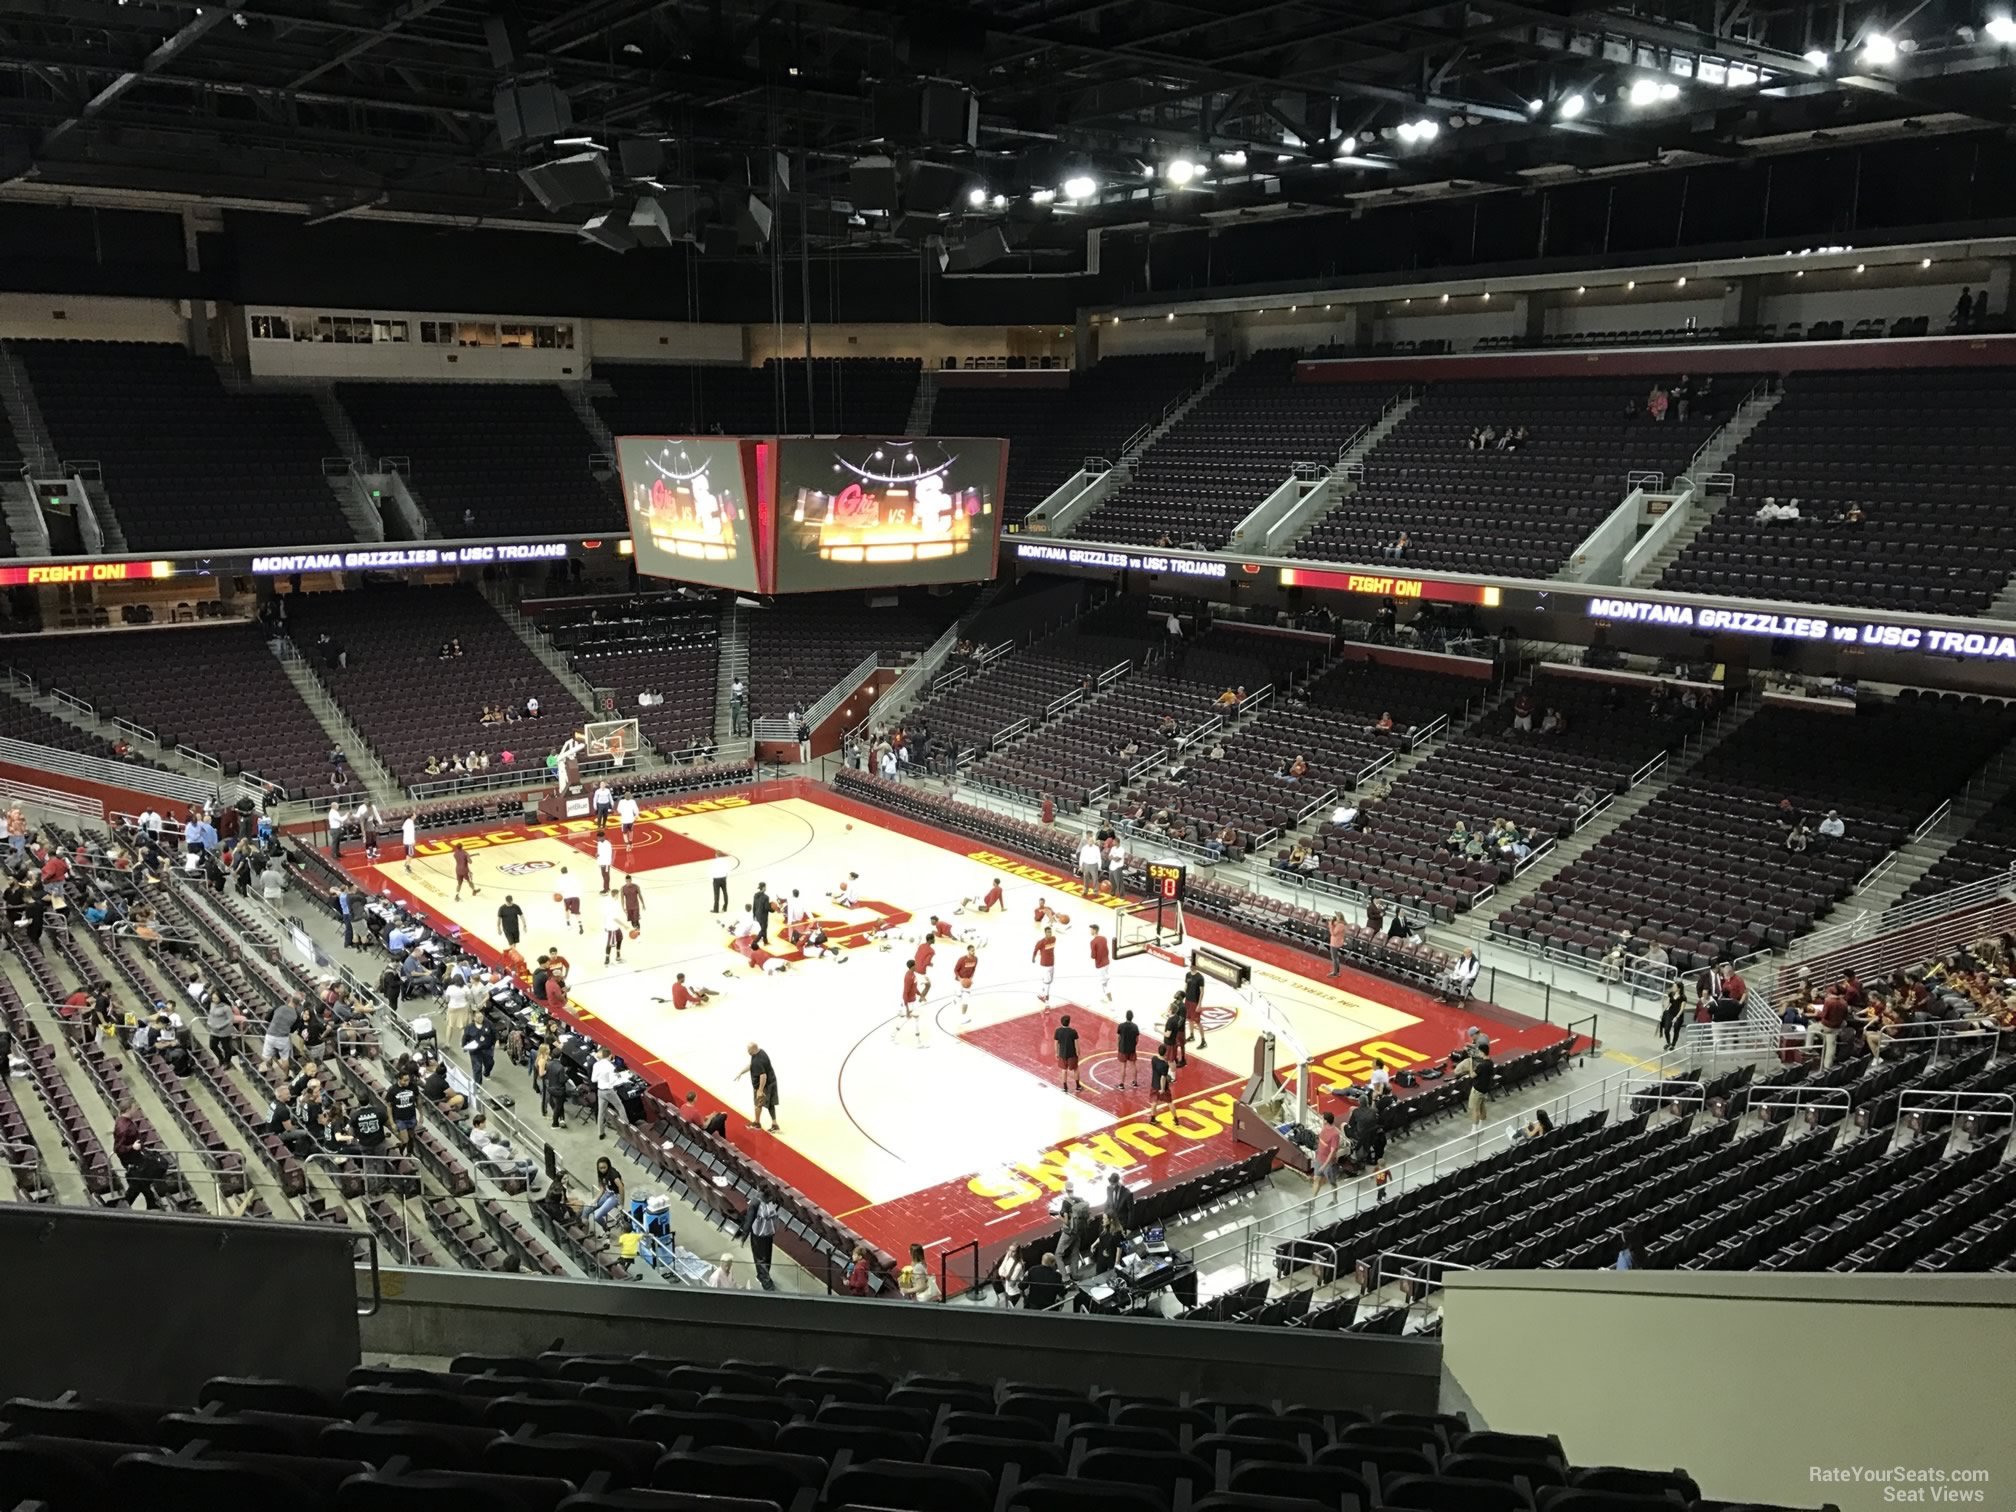 section 222, row 10 seat view  - galen center